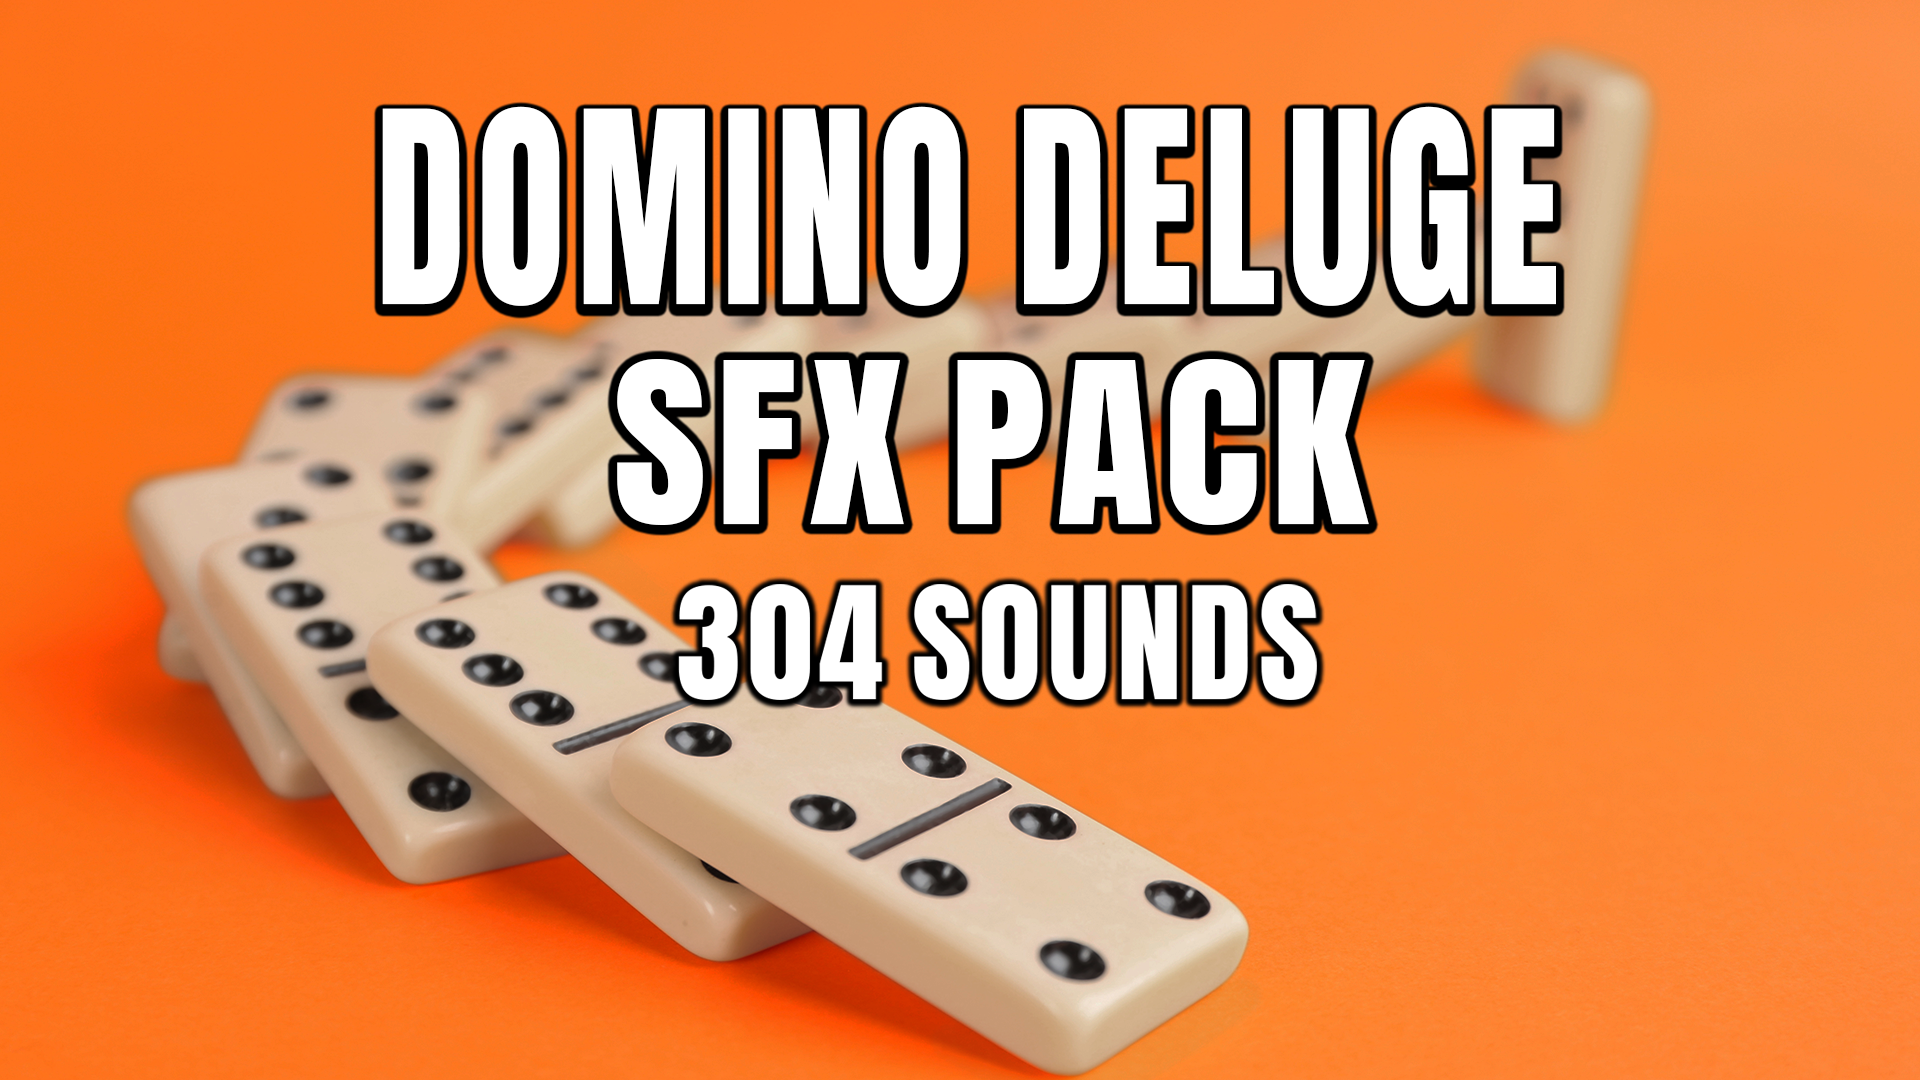 Domino Sounds - The Domino deluge Sound Pack